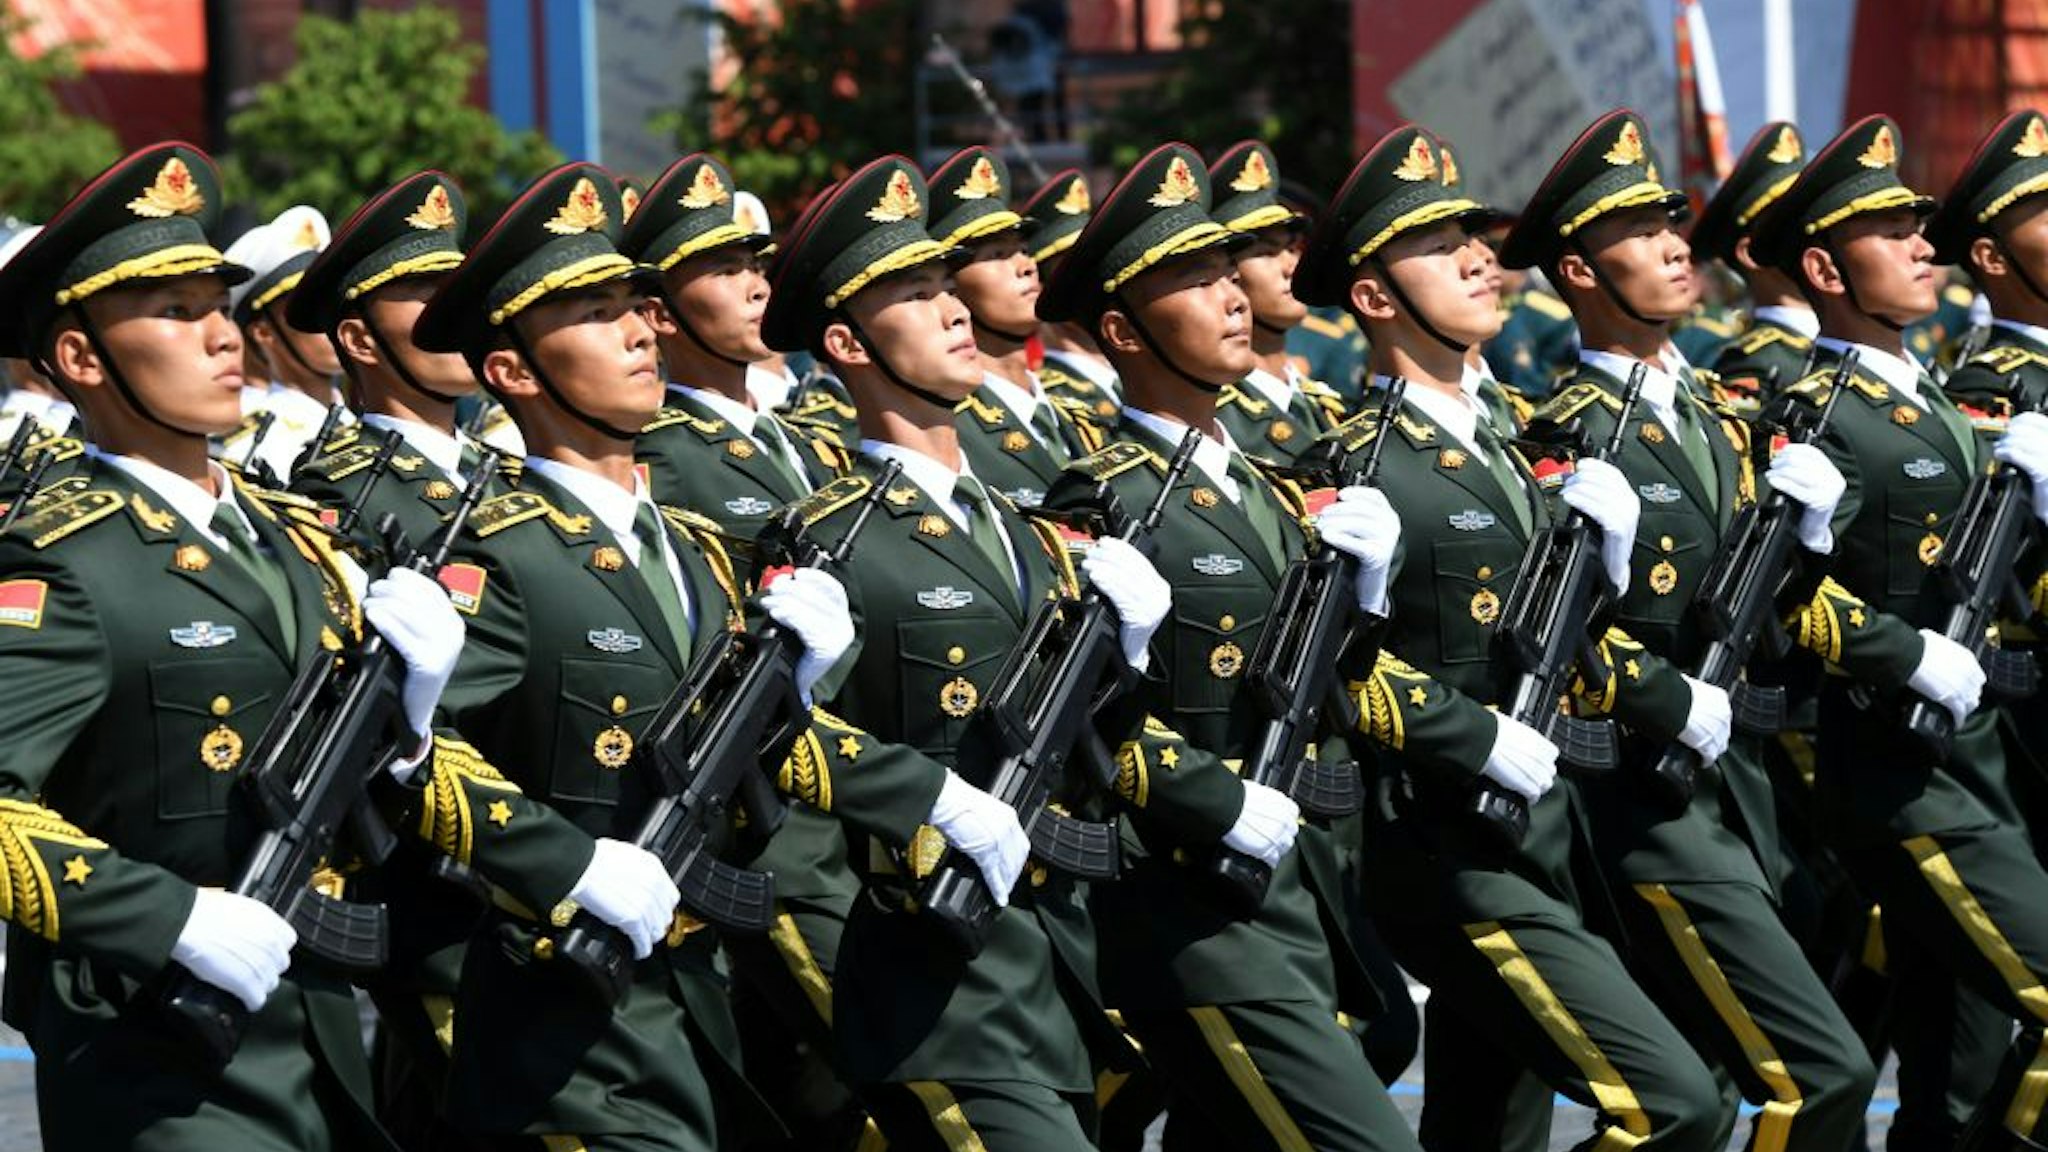 MOSCOW, RUSSIA - JUNE 24: A parade unit of the Chinese Armed Forces during the Victory Day military parade in Red Square marking the 75th anniversary of the victory in World War II, on June 24, 2020 in Moscow, Russia. The 75th-anniversary marks the end of the Great Patriotic War when the Nazi's capitulated to the then Soviet Union. (Photo by Sergey Pyatakov - Host Photo Agency via Getty Images)